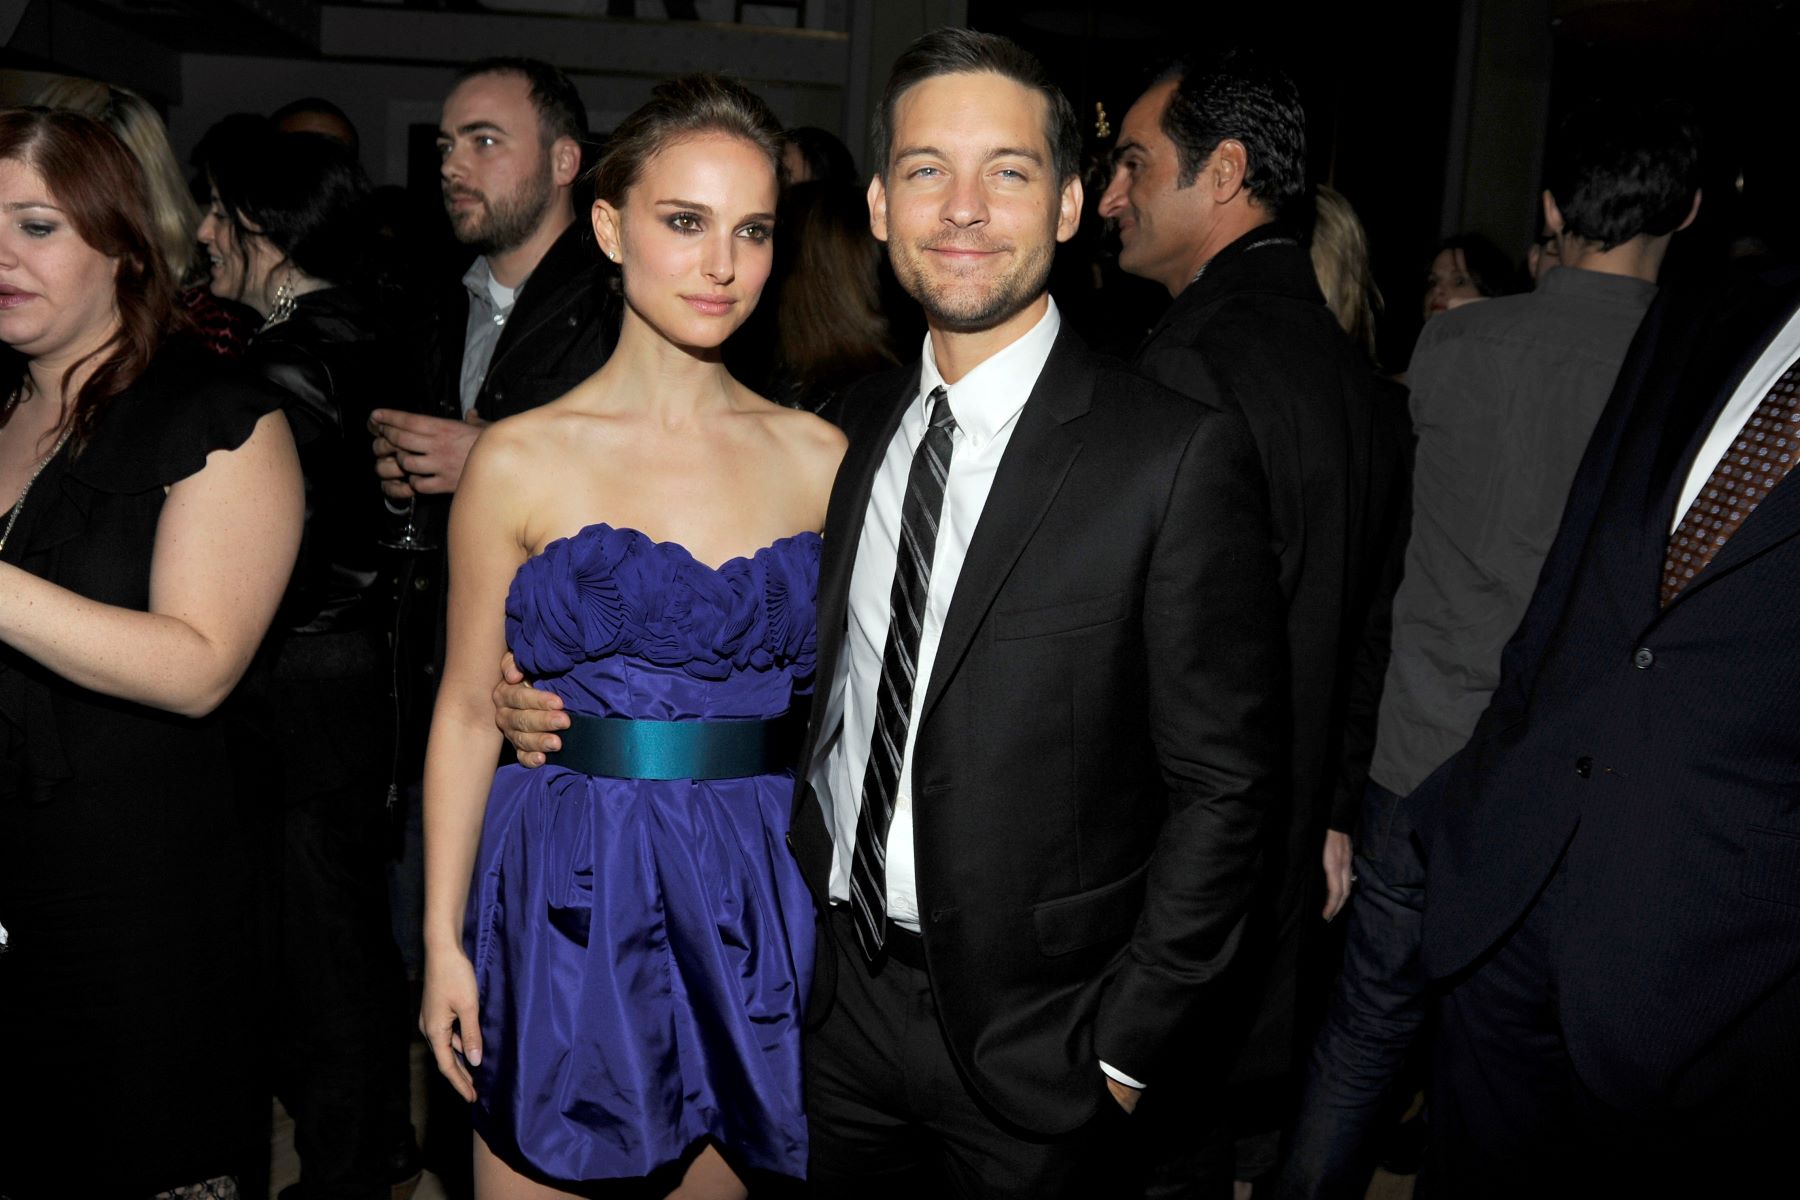 Natalie Portman and Tobey Maguire attending The Cinema Society after a party for 'Brothers' in New York City